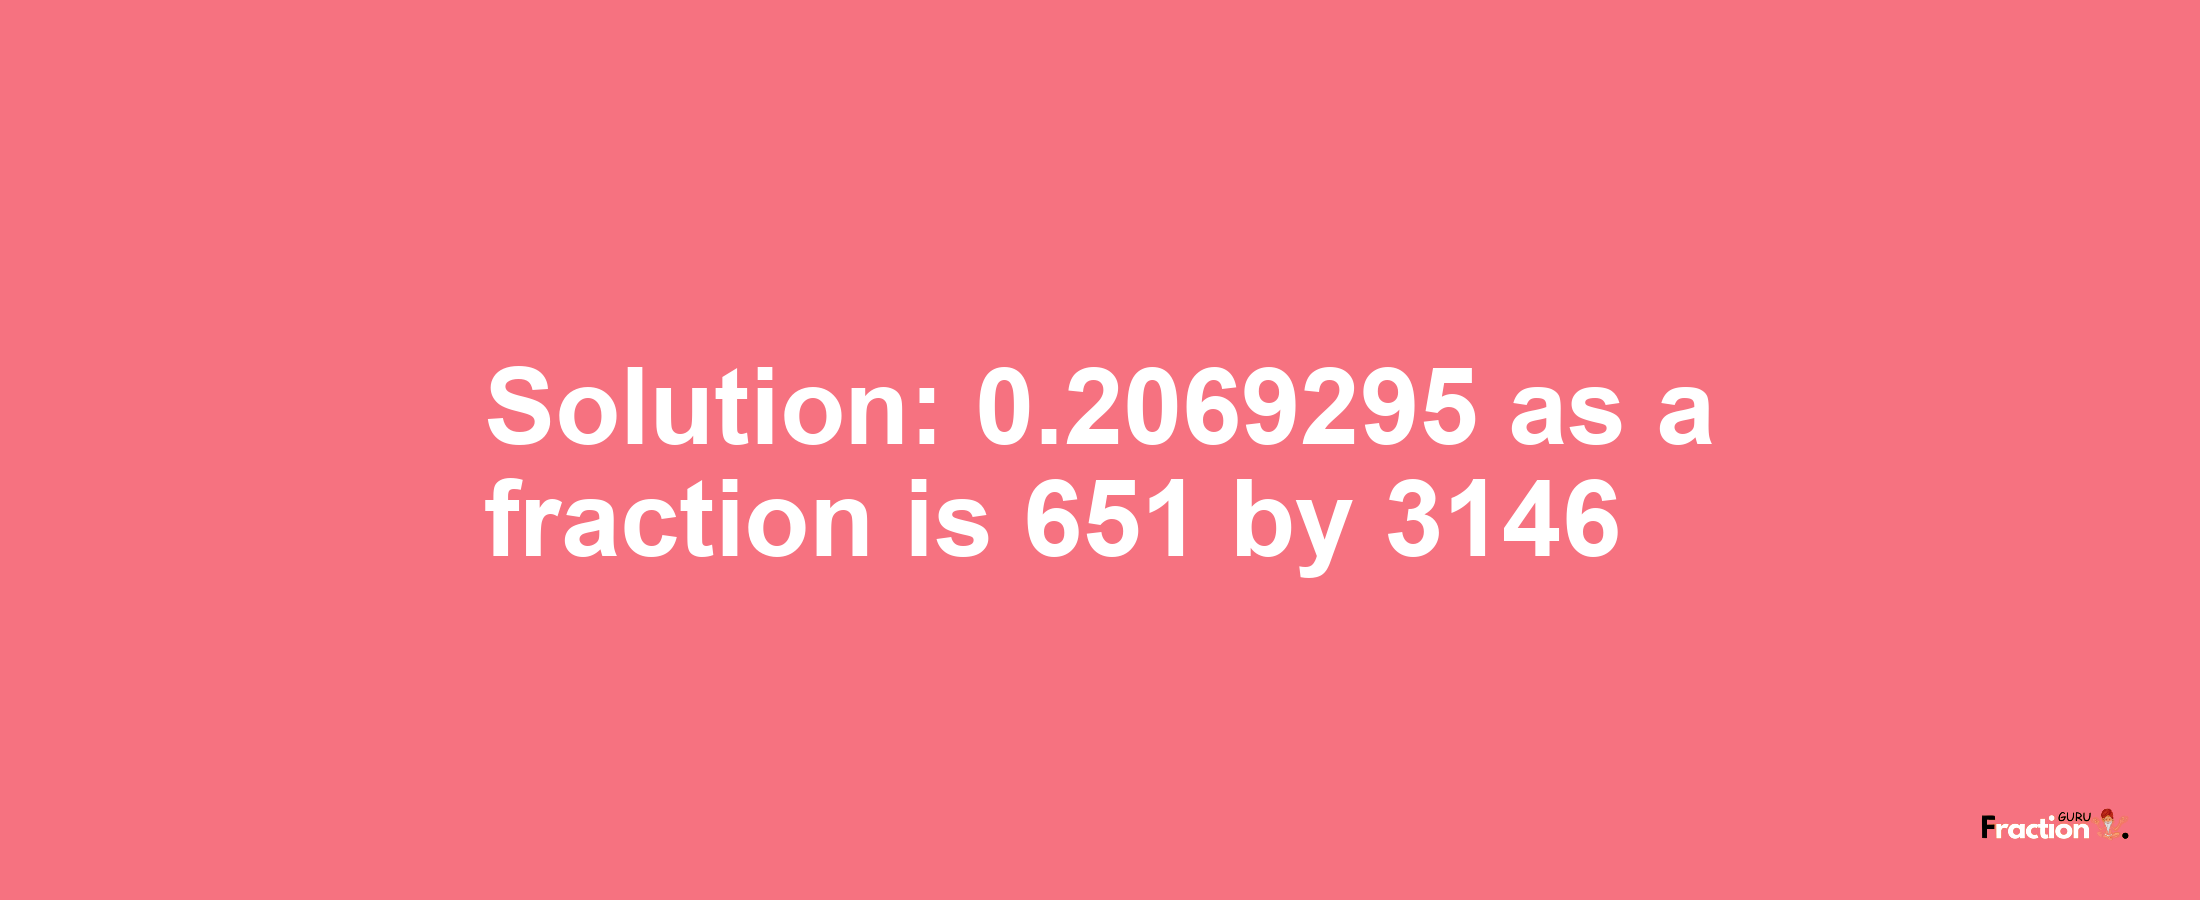 Solution:0.2069295 as a fraction is 651/3146